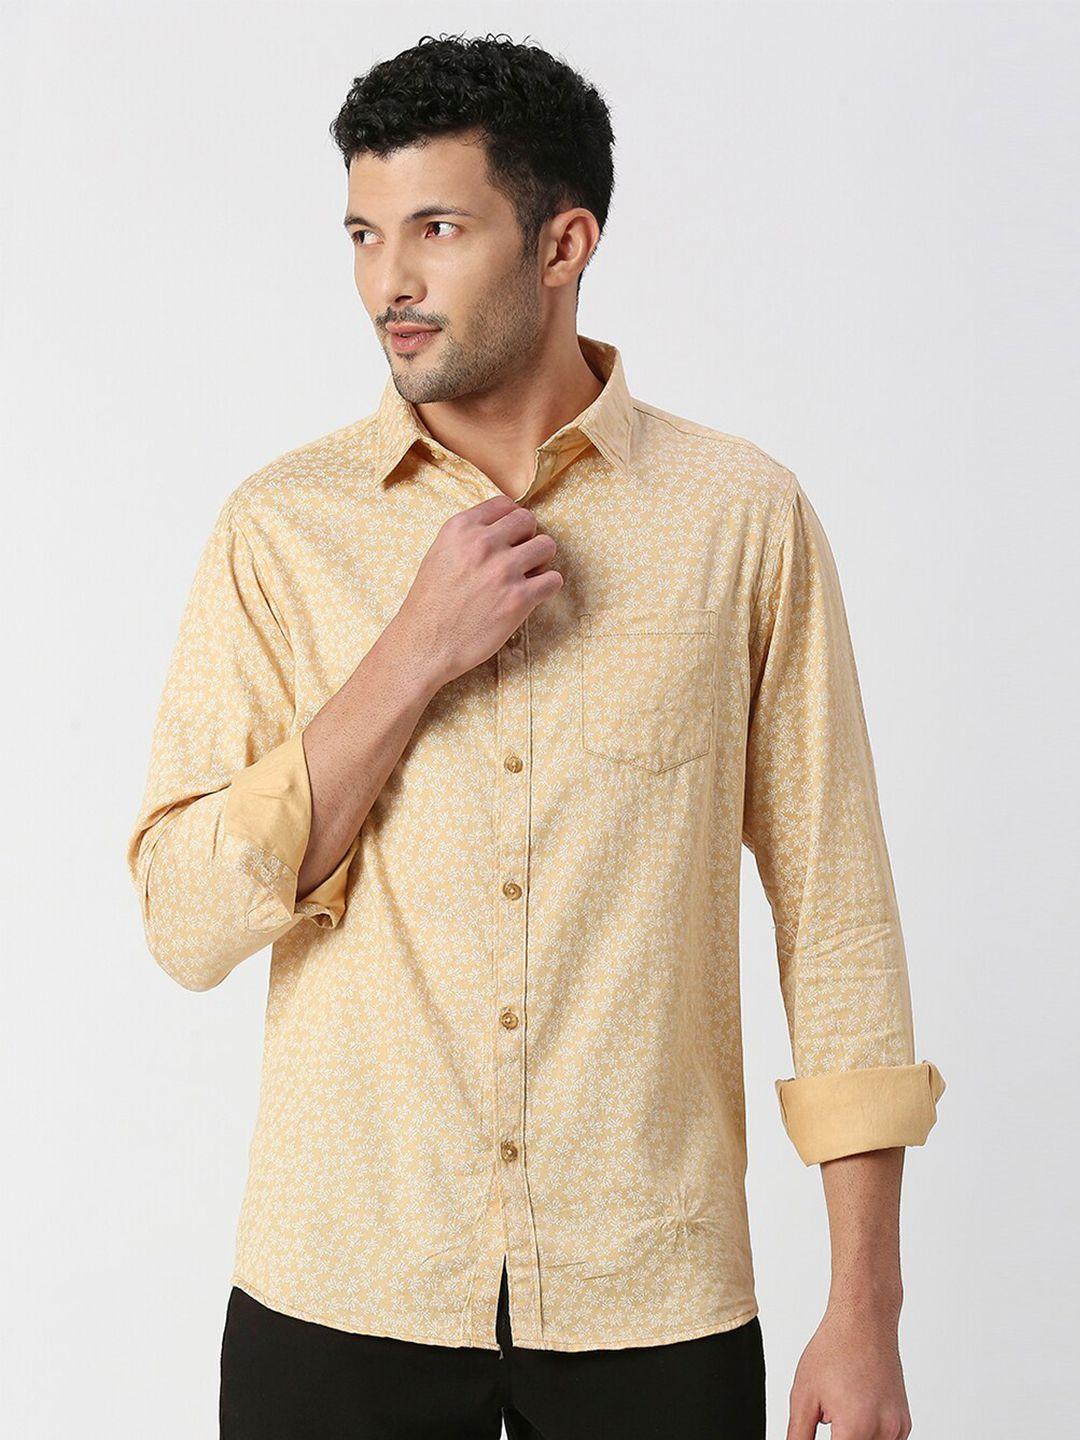 snx-classic-tailored-fit-floral-printed-cotton-casual-shirt